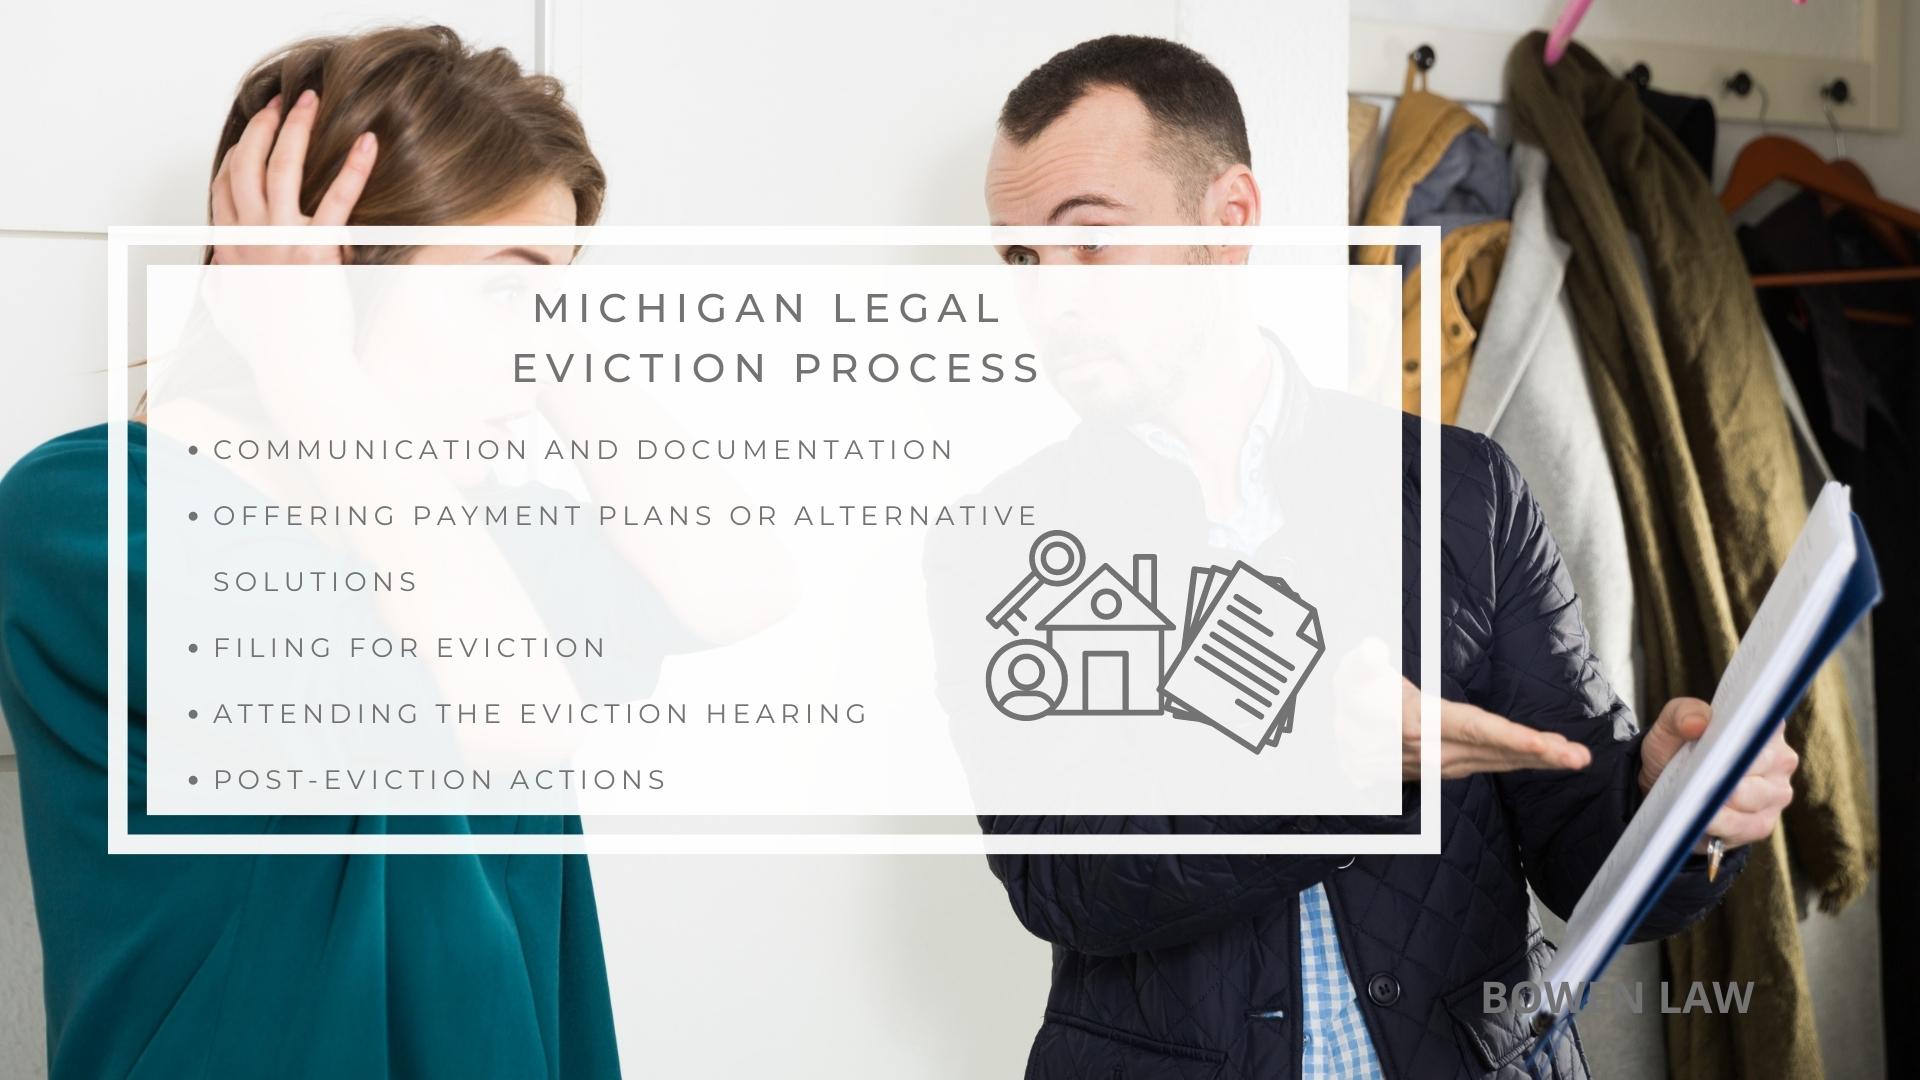 Infographic image of michigan legal eviction process